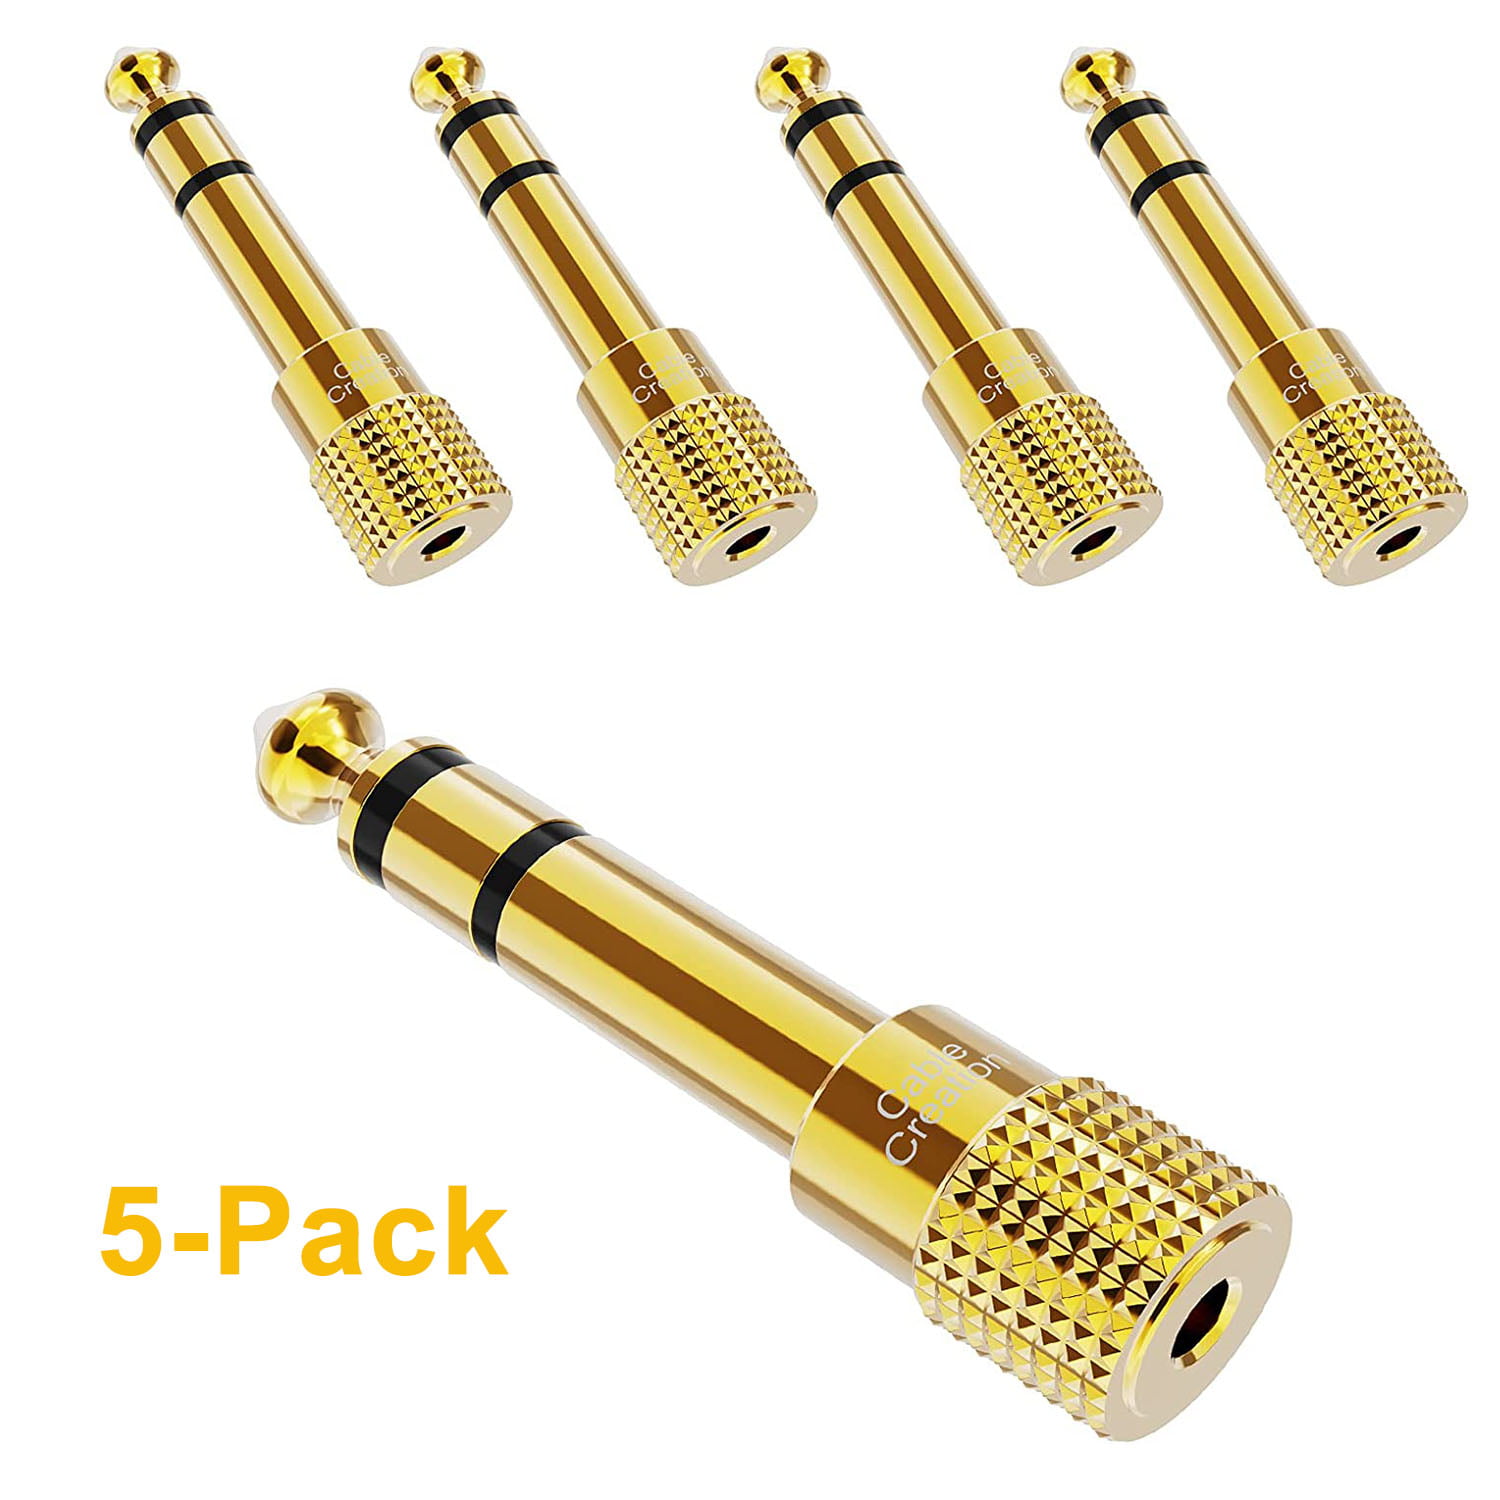 5 Pack 3.5mm 1/8" Stereo Male Audio TRS Gold Plated Jack Plug Adapter Connector